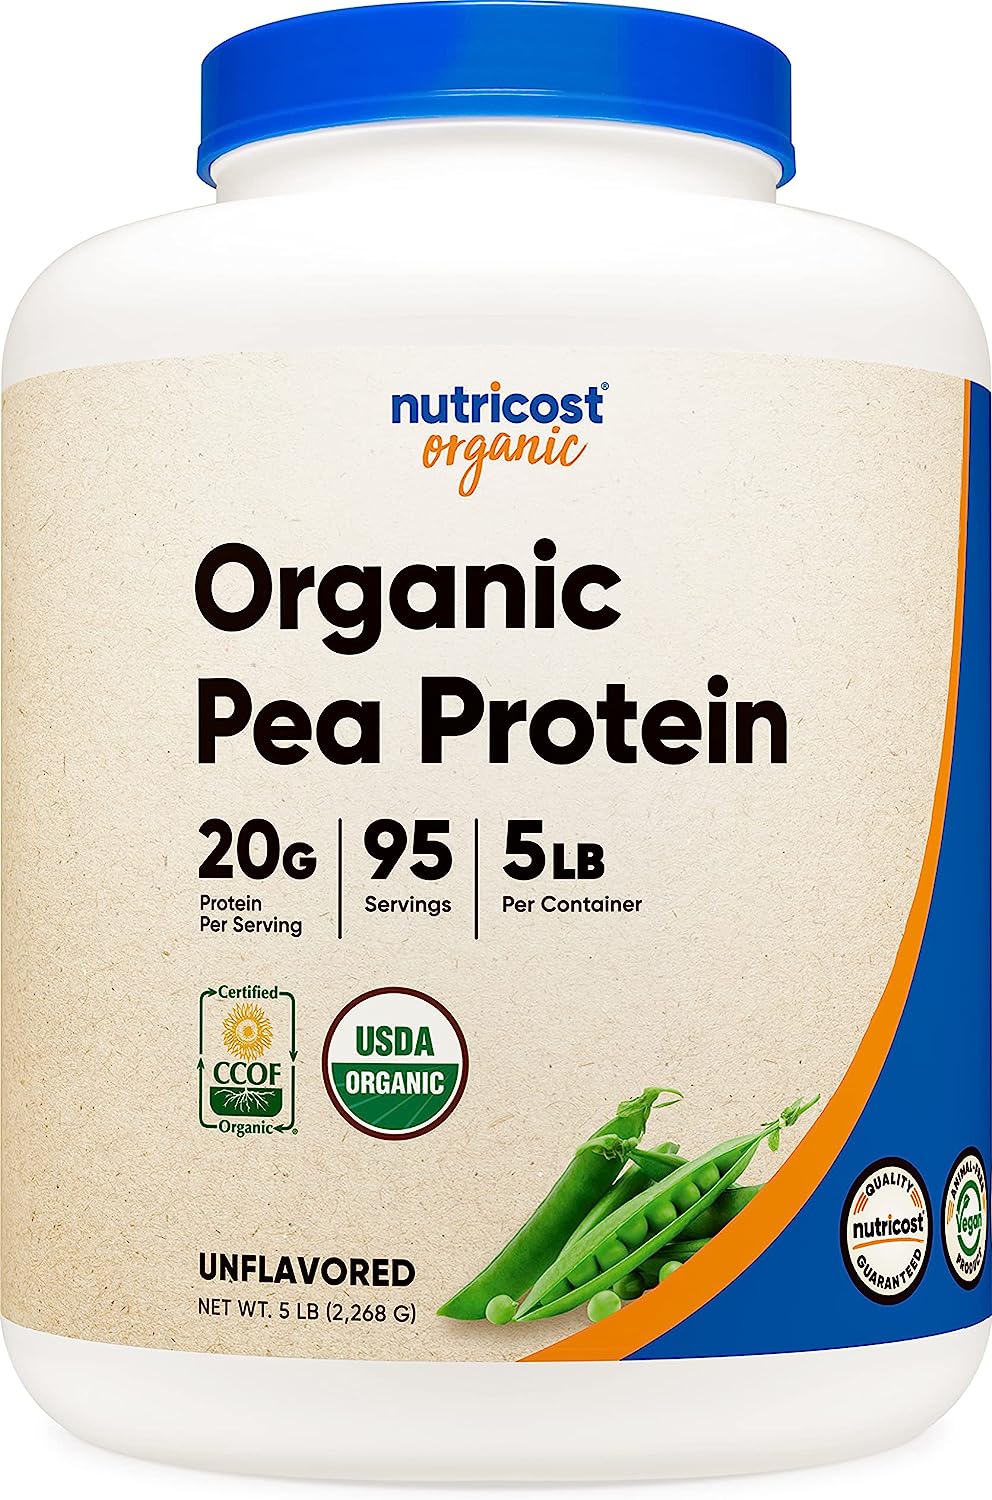 Nutricost Organic Pea Protein Isolate Powder (5S) - Unavored, Certified USDA Organic, Protein from Plants, Vegetarian Friendly, Gluten Free, Non-GMO